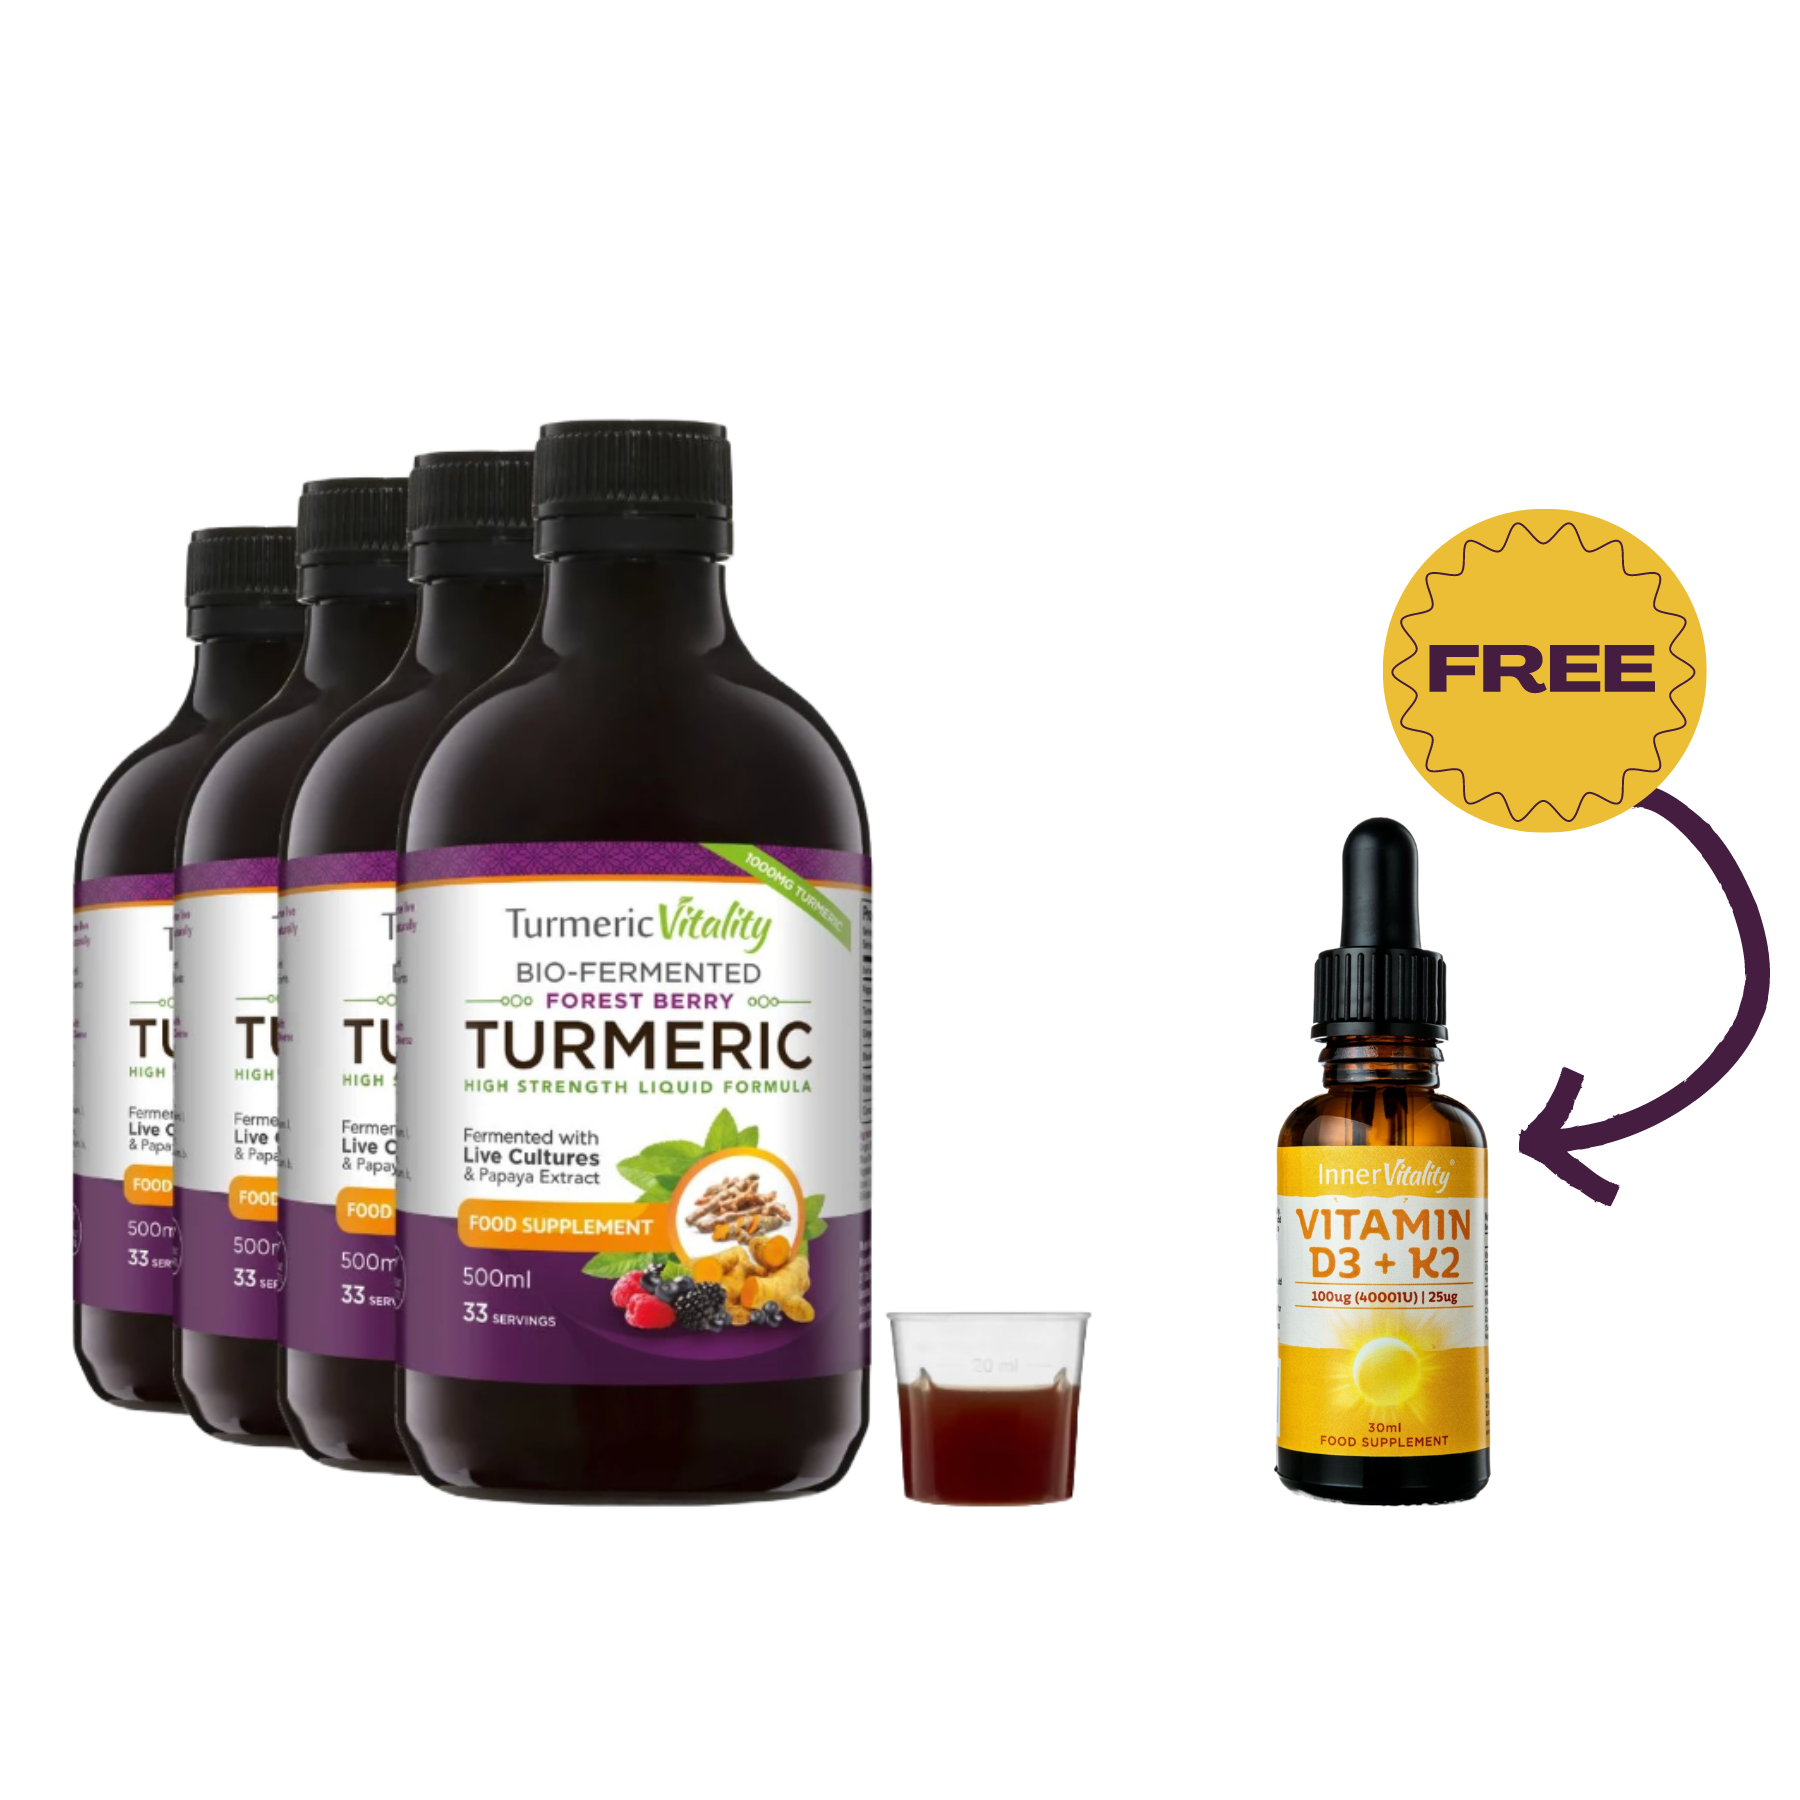 Bio-fermented Turmeric x4 with Free D3